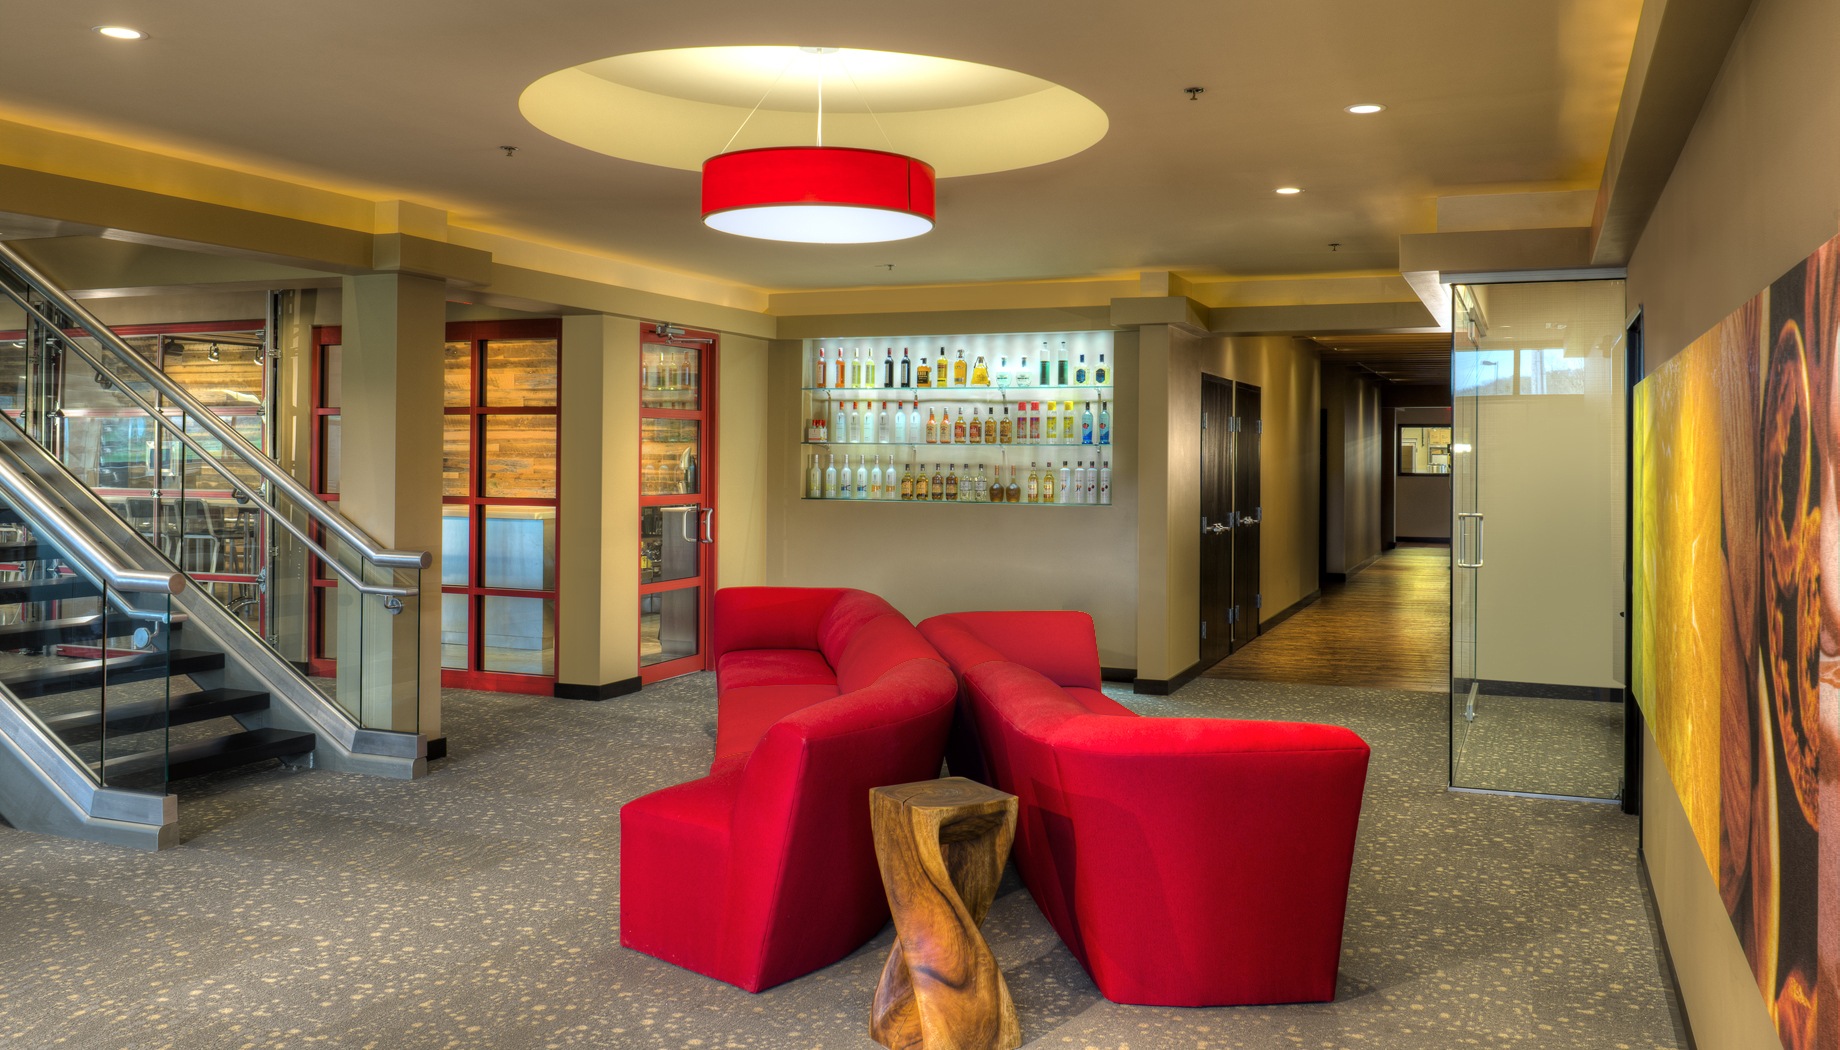 Interior Design Photography of Jim Beam Distillery Claremont Kentucky Design by Big Red Rooster COlumbus Ohio